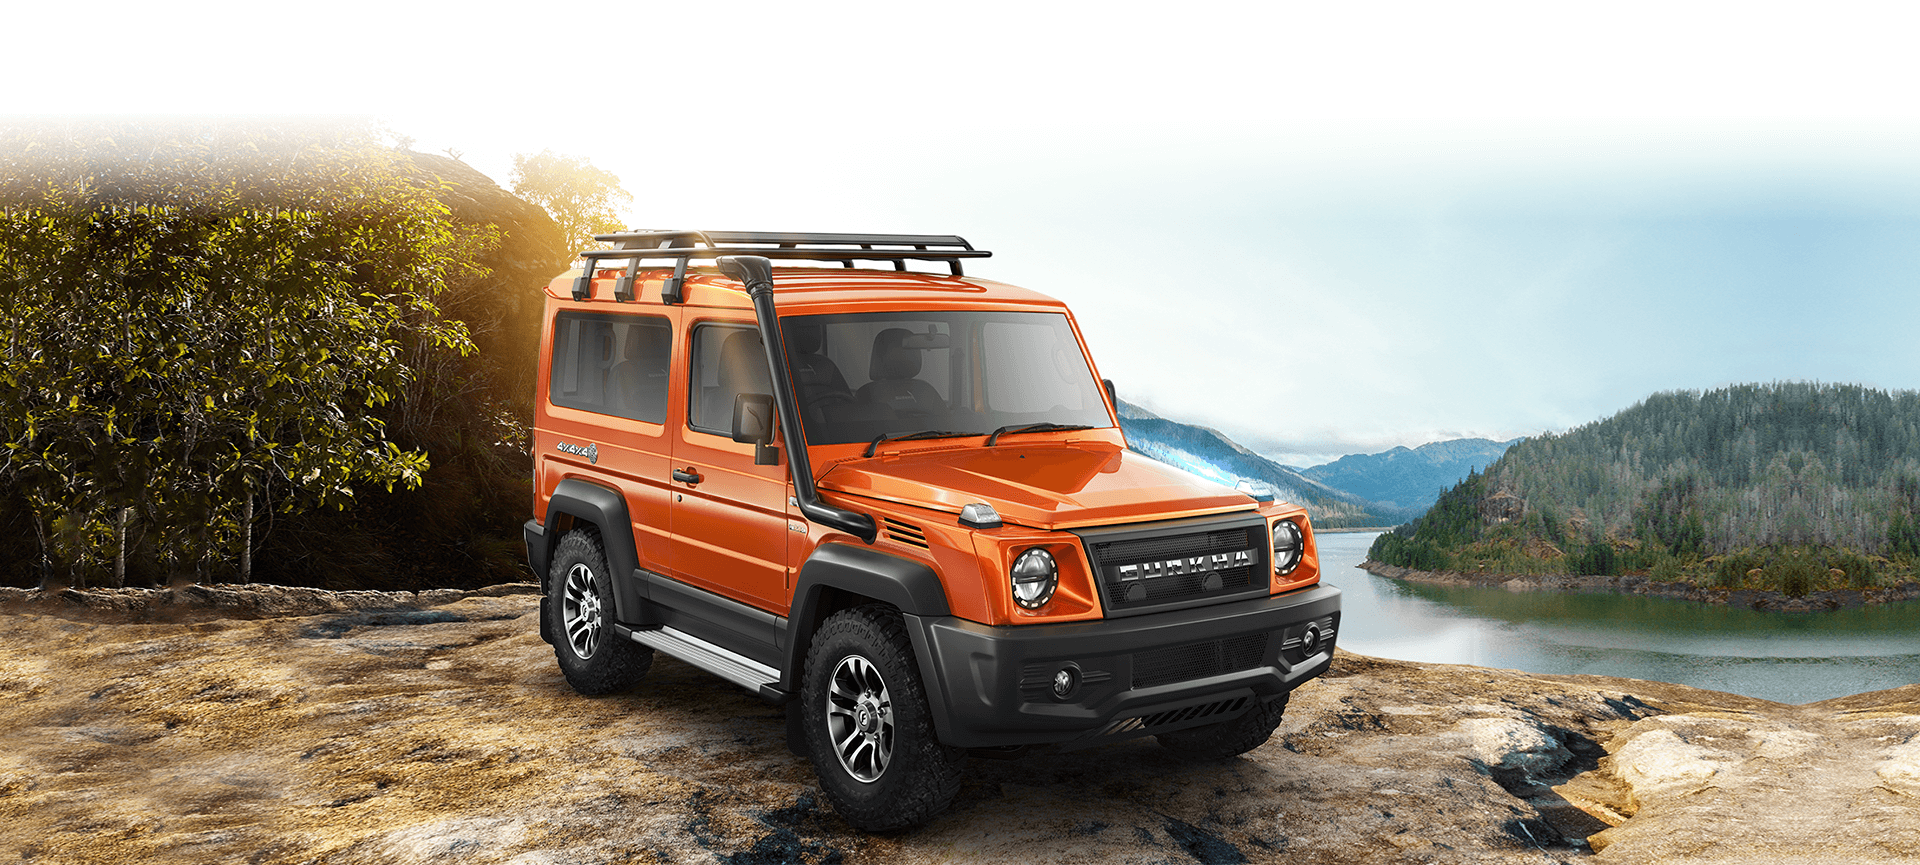 Read more about the article Force Gurkha 5 Door Launch Date In India & Price: Launch soon with powerful performance